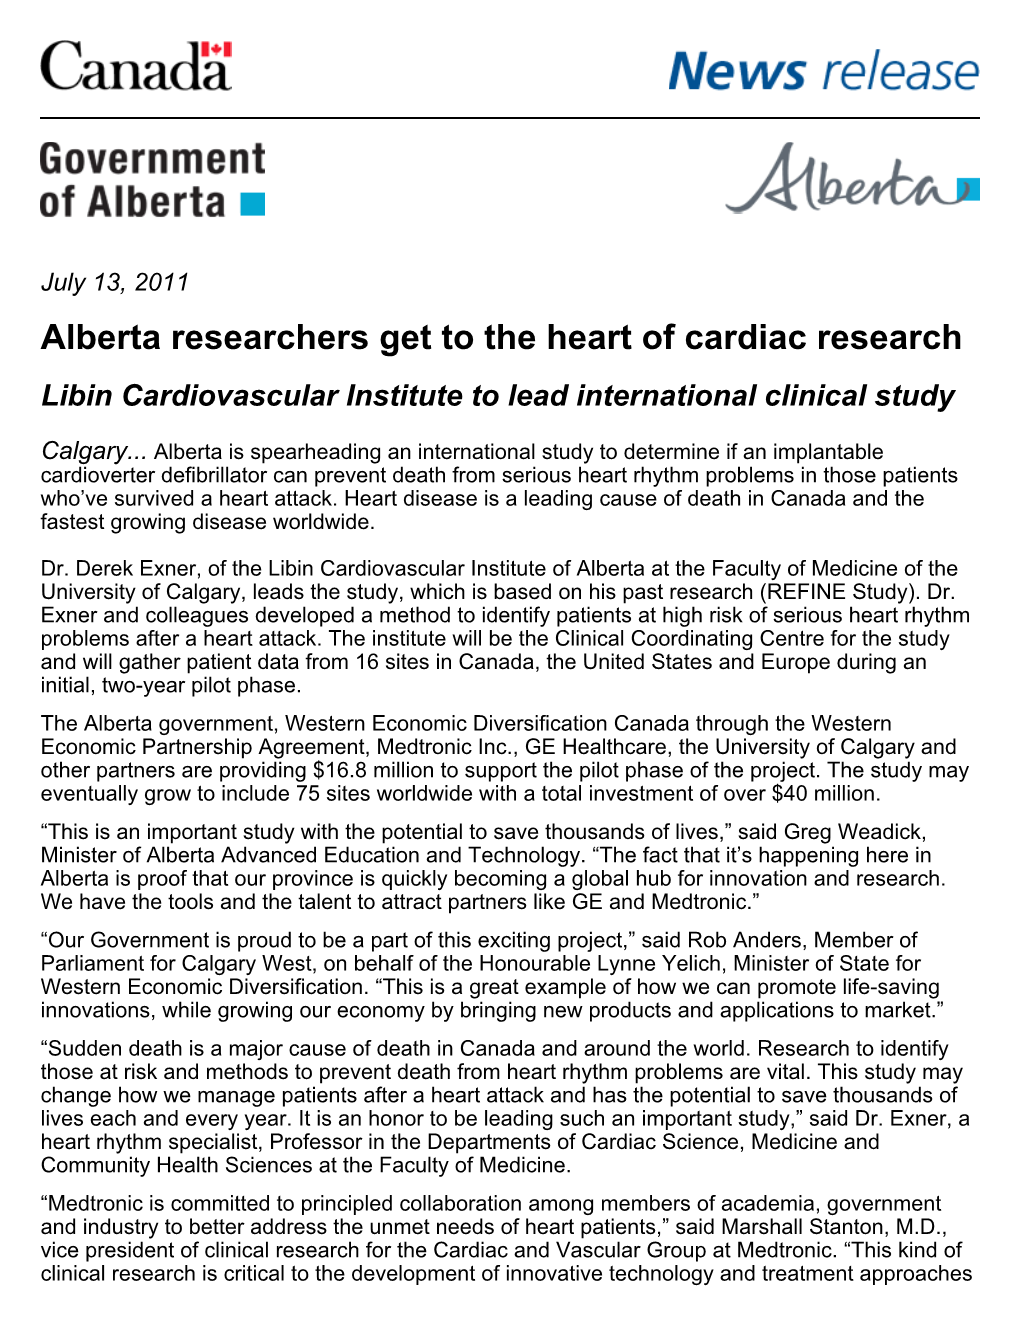 Alberta Researchers Get to the Heart of Cardiac Research Libin Cardiovascular Institute to Lead International Clinical Study